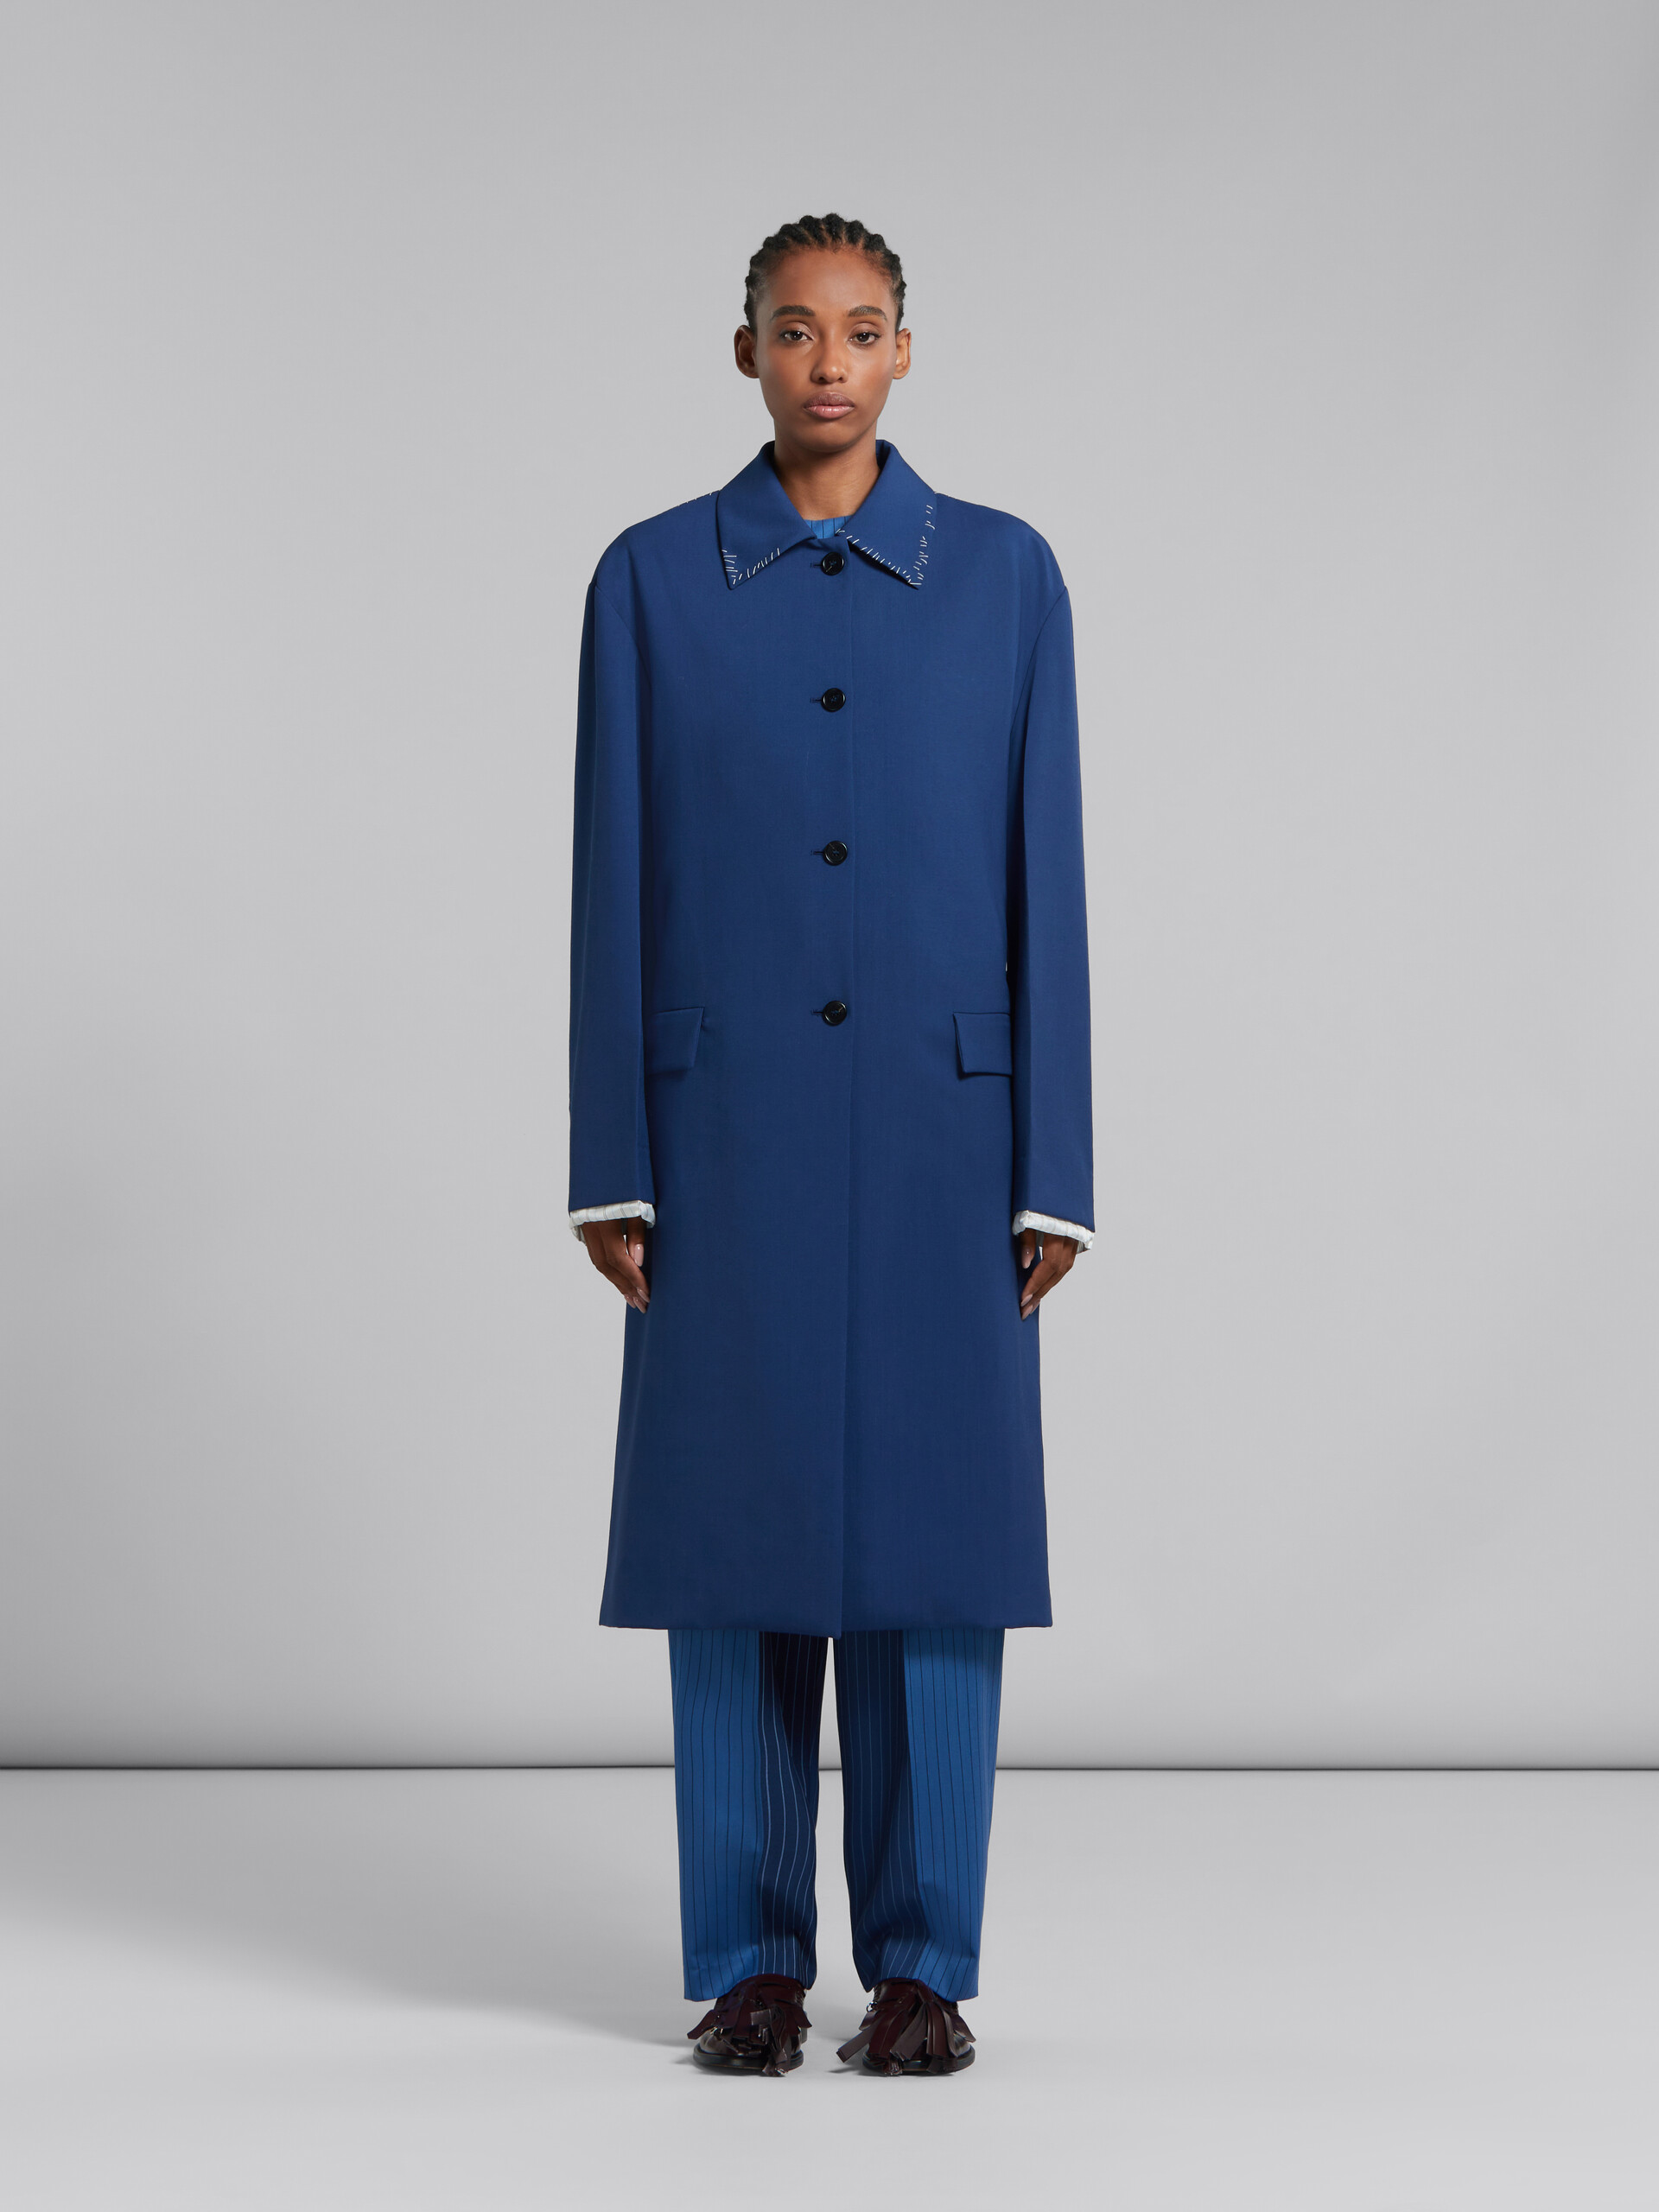 Blue tropical wool trench coat - Coat - Image 2